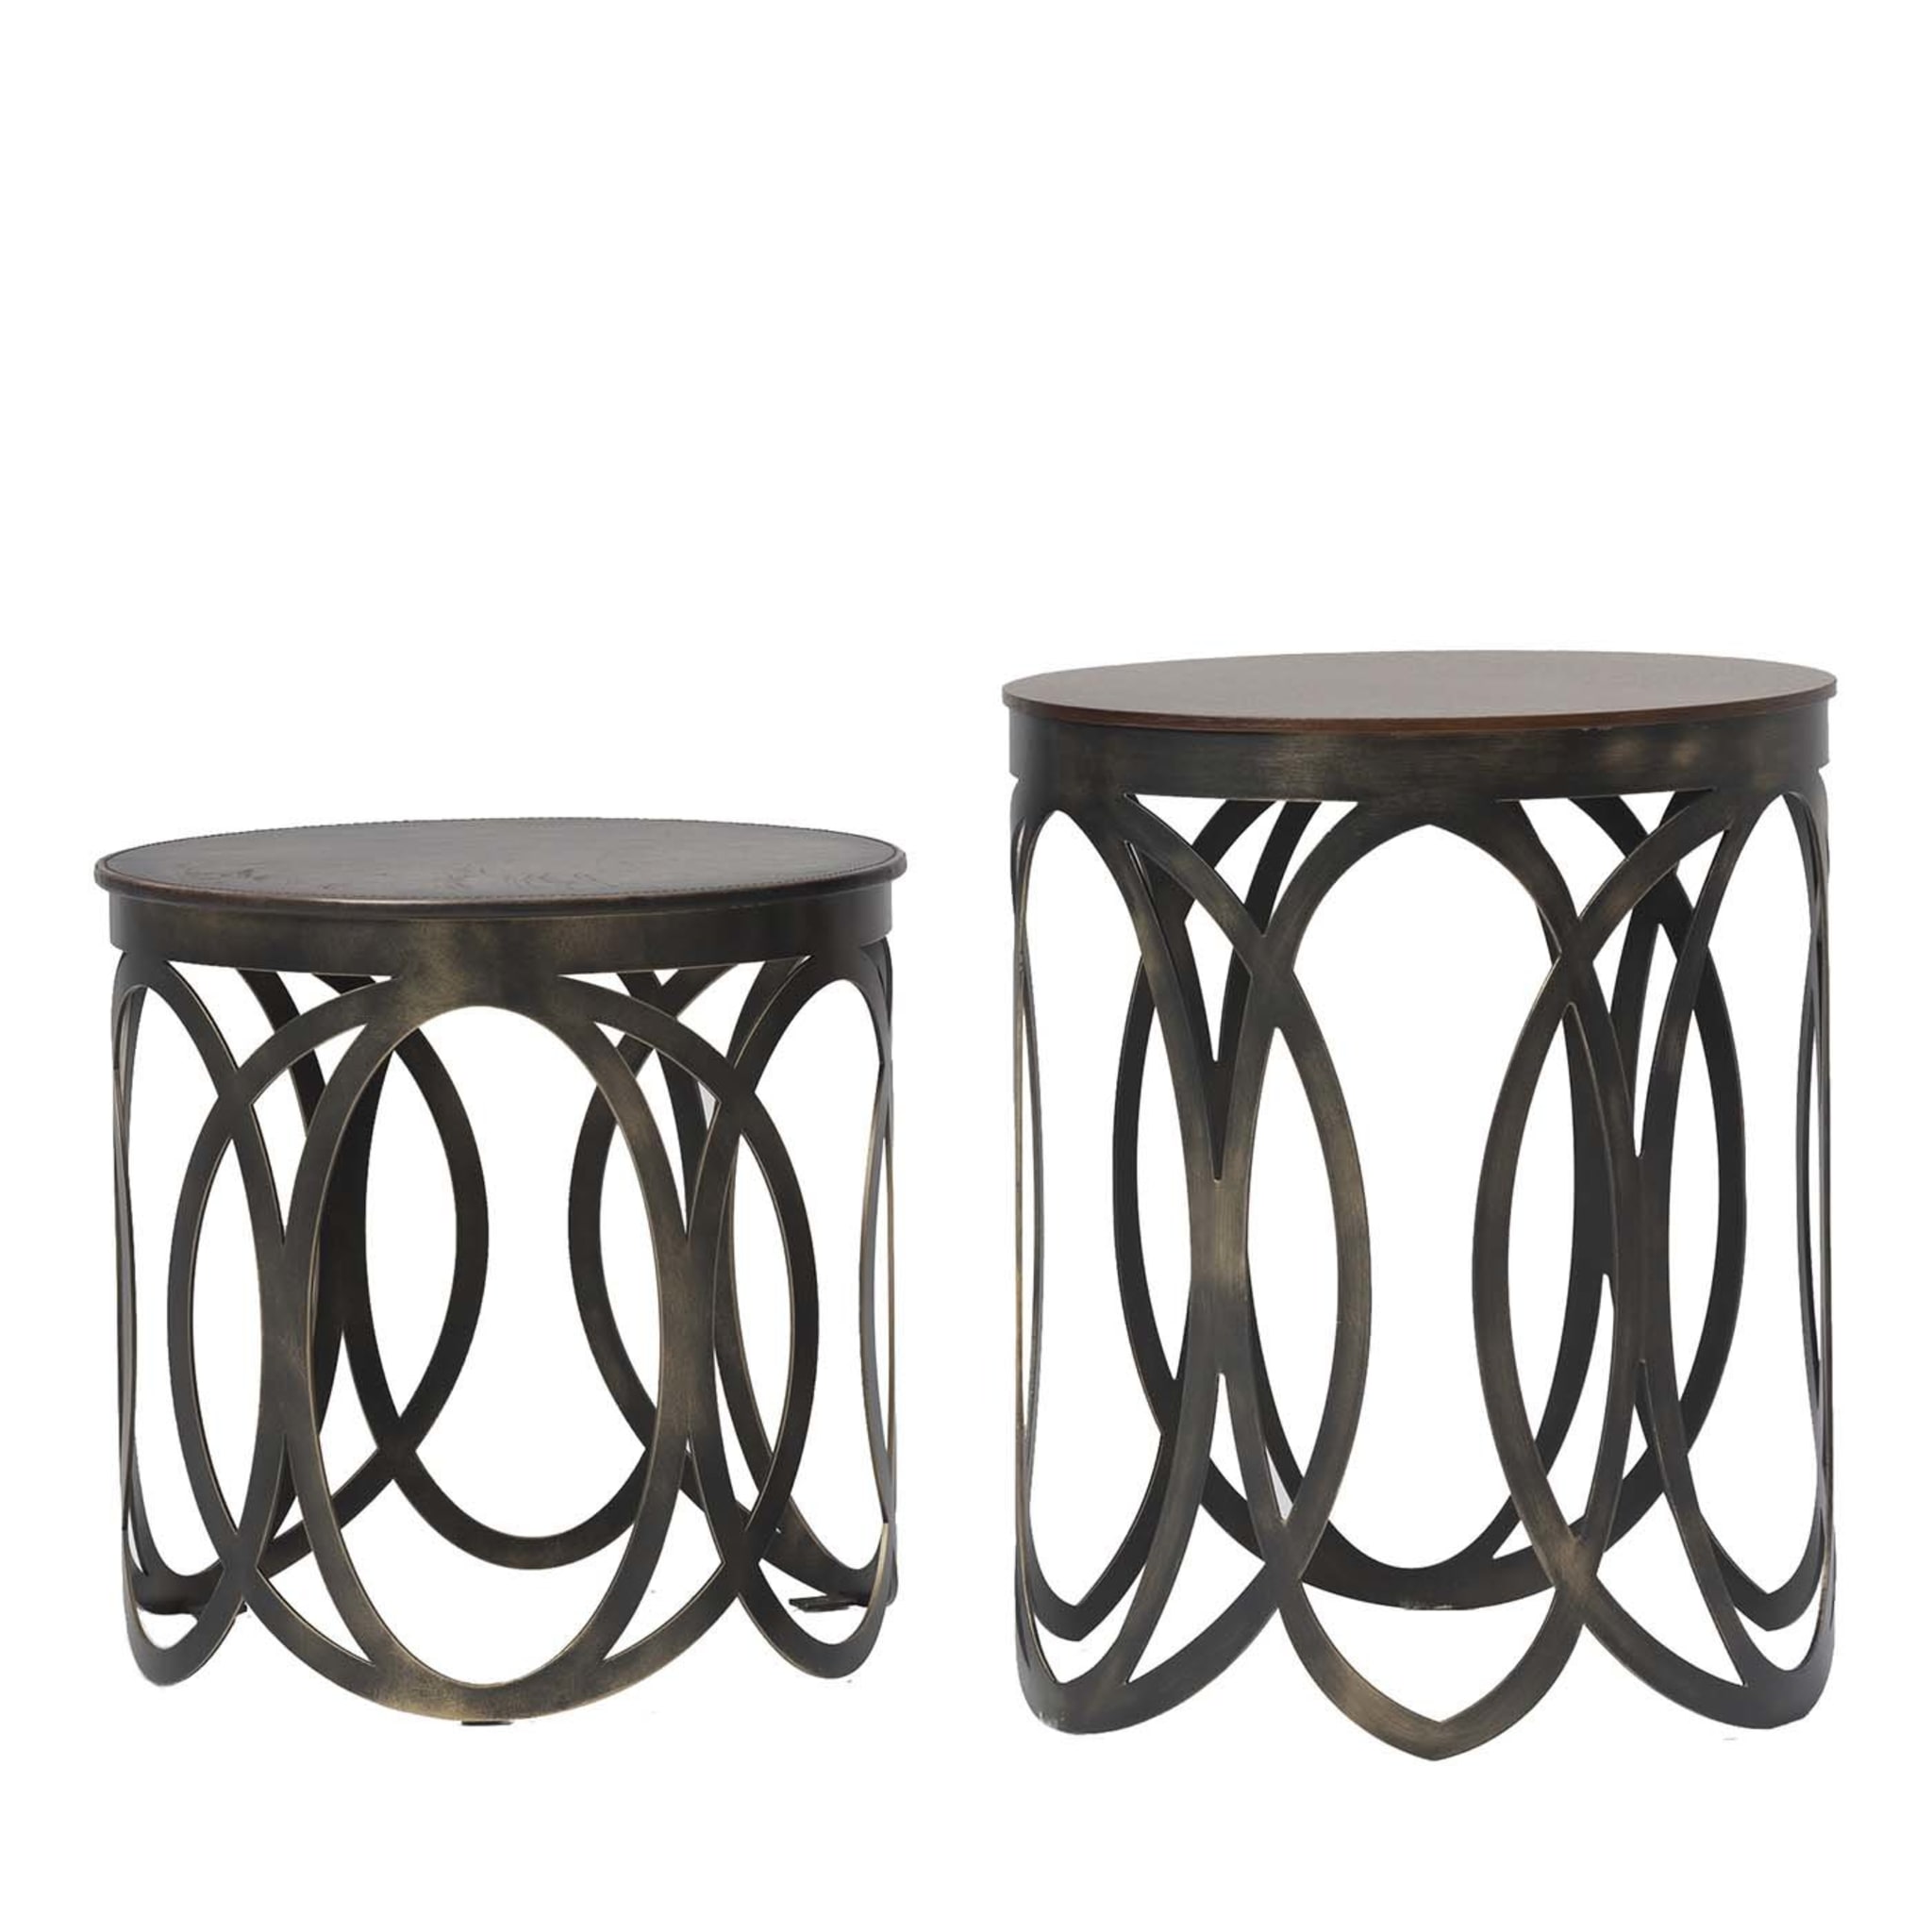 Valzer Side Table Tribeca Collection by Marco and Giulio Mantellassi - Alternative view 1